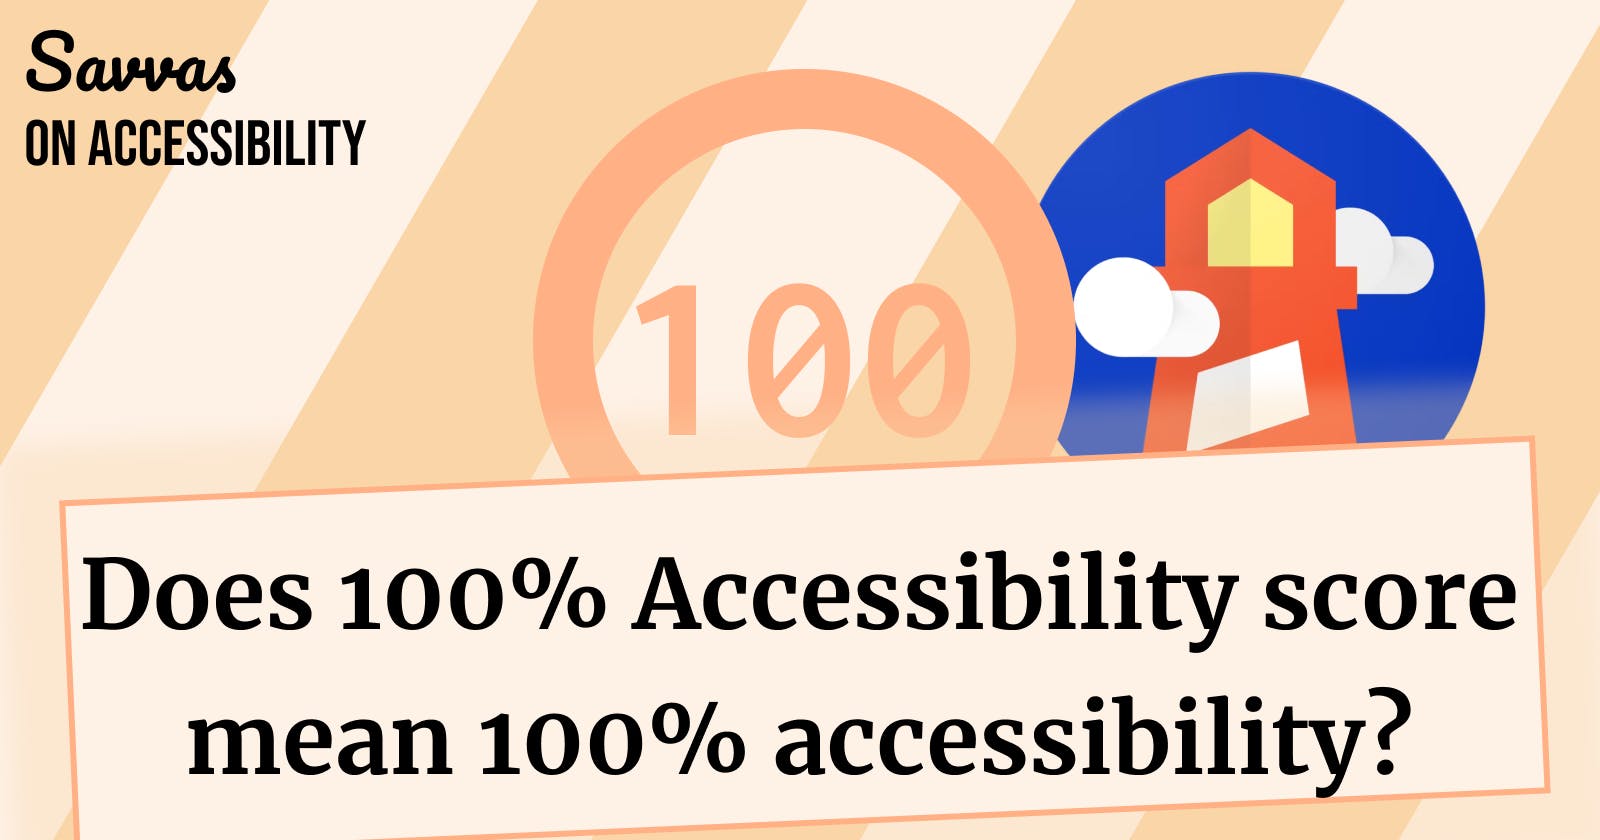 My Lighthouse Accessibility score is 100%. Does that mean my website is 100% accessible?